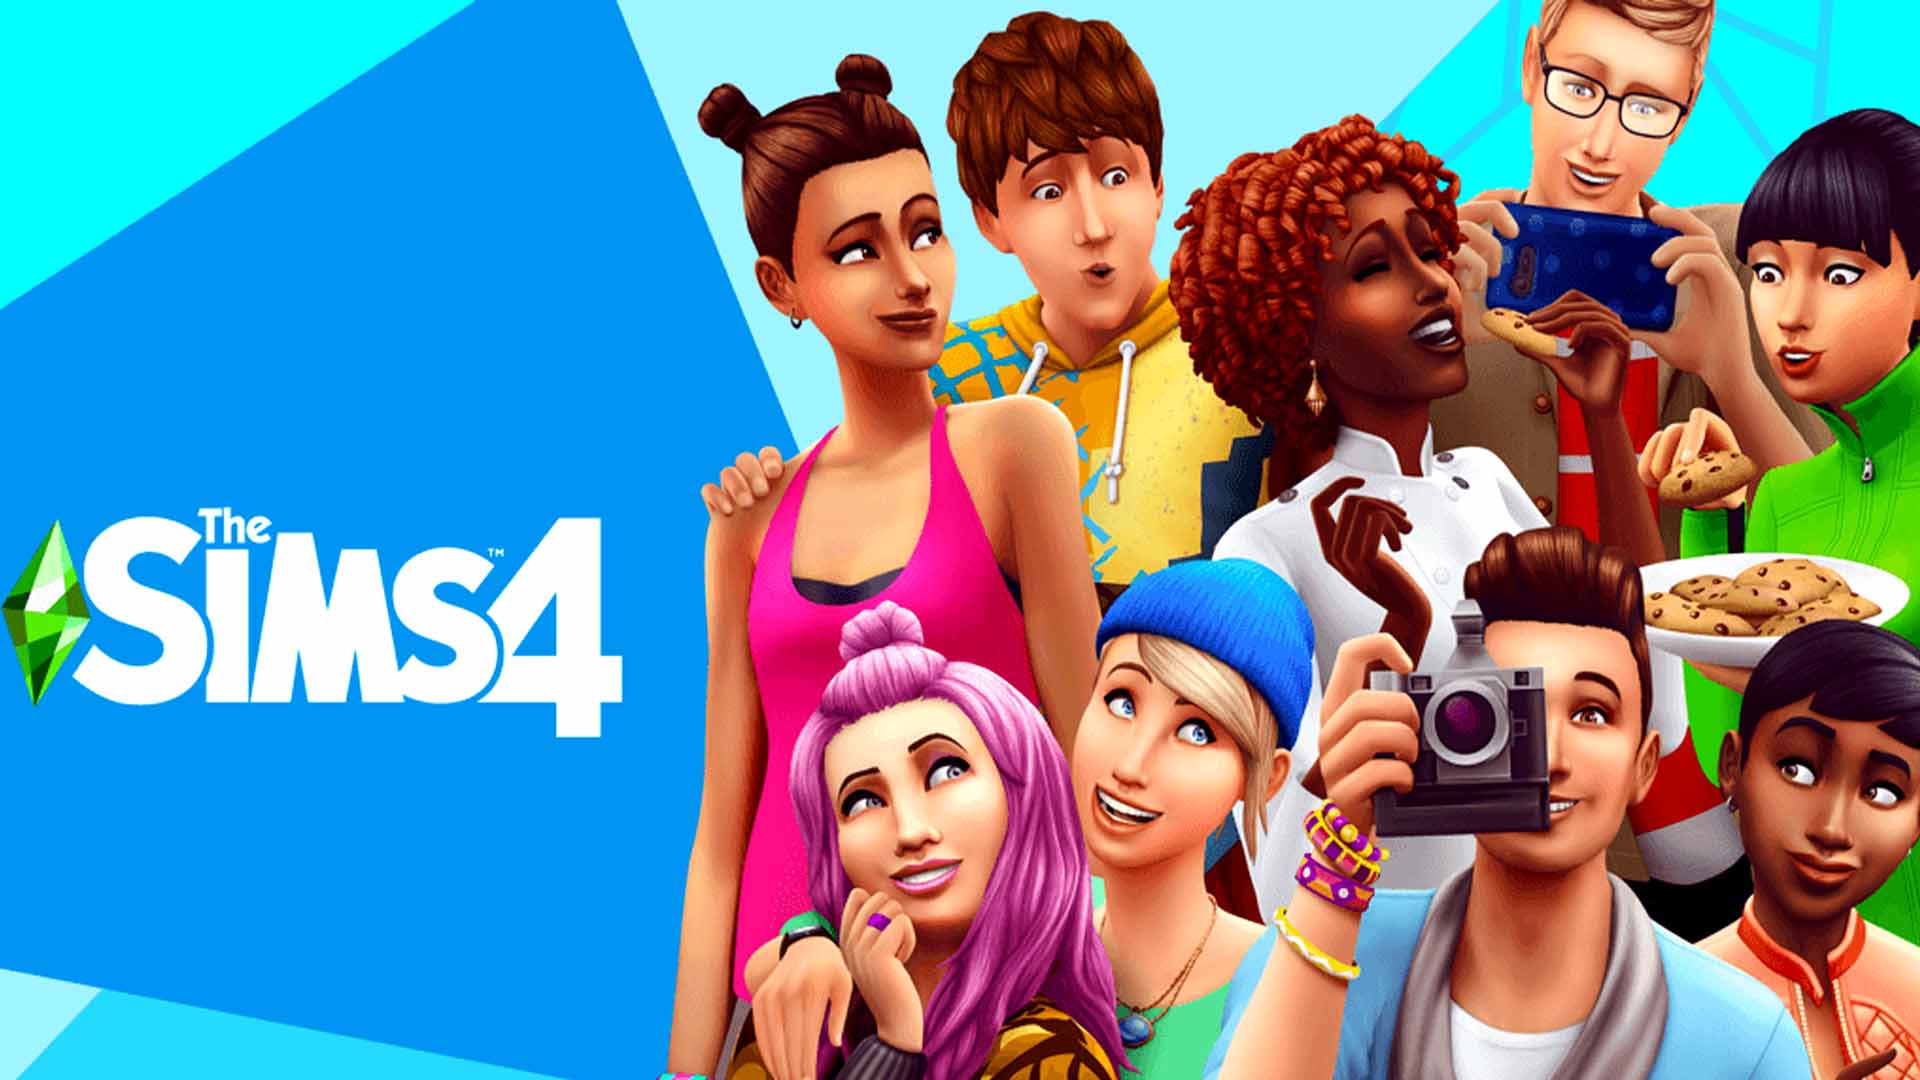 download the sims 4 all dlc